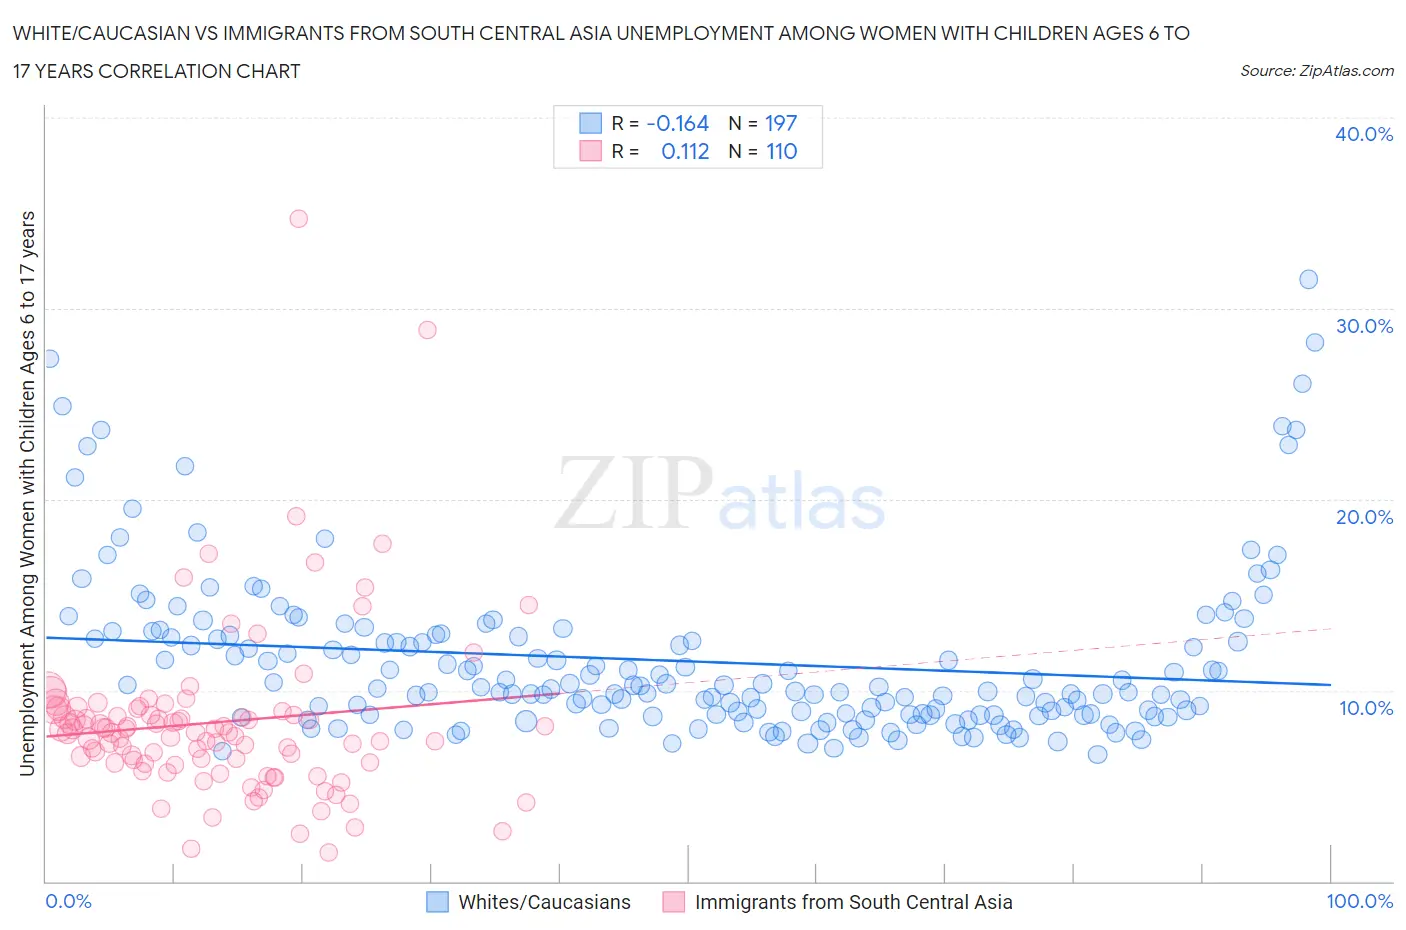 White/Caucasian vs Immigrants from South Central Asia Unemployment Among Women with Children Ages 6 to 17 years